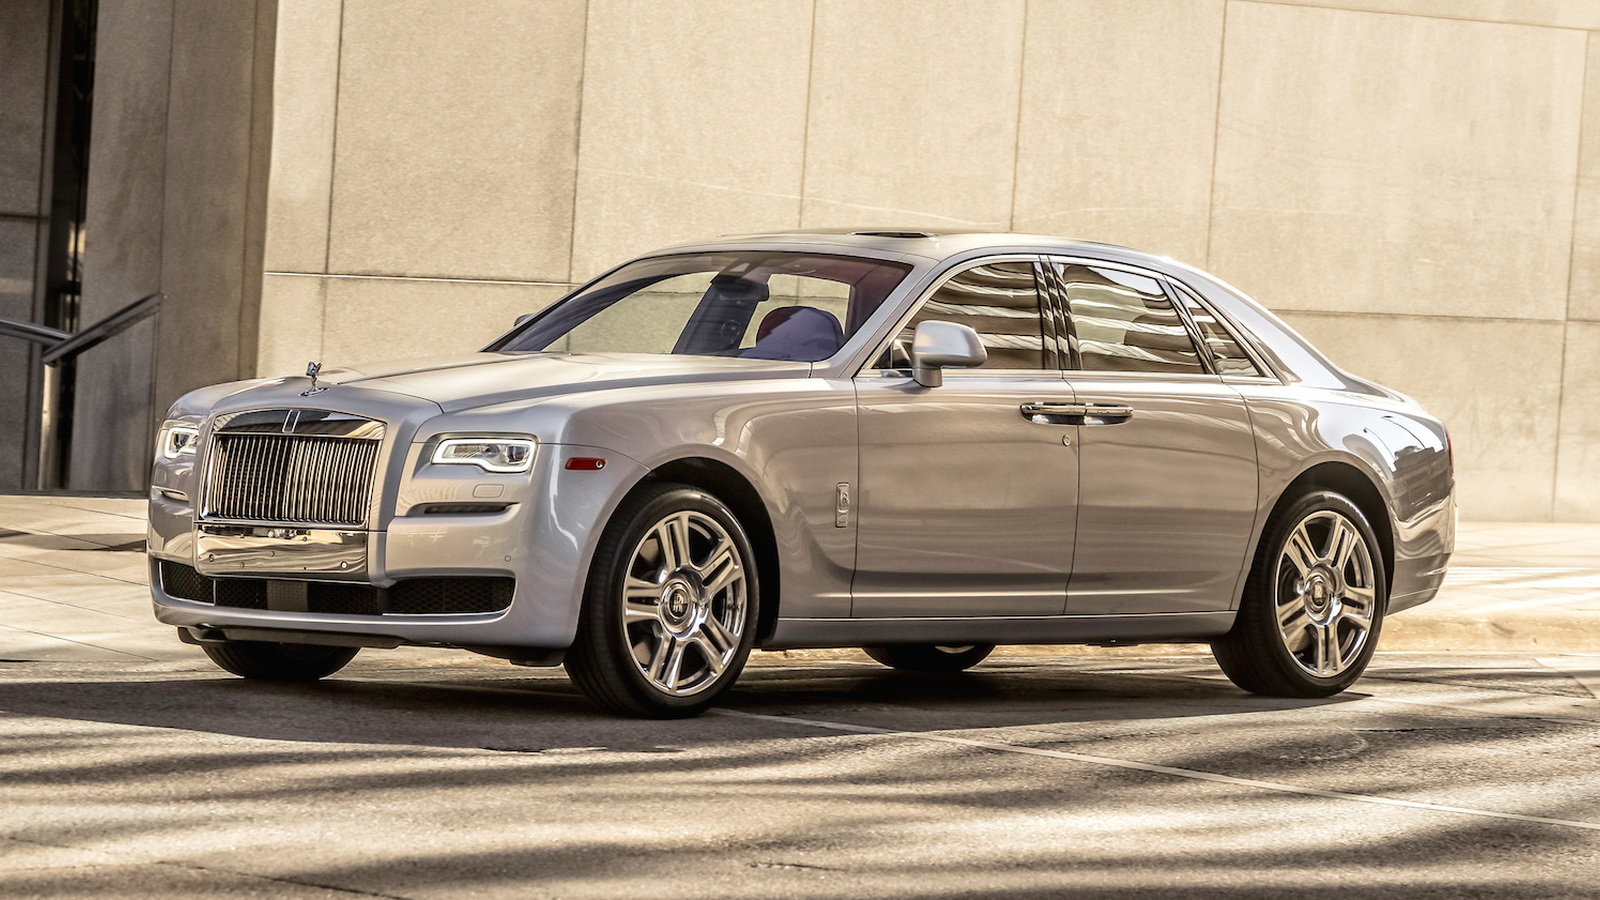 2015 Rolls-Royce Ghost Series II, First Drive. Photo by Greg Jarem for Rolls-Royce Motor Cars NA.